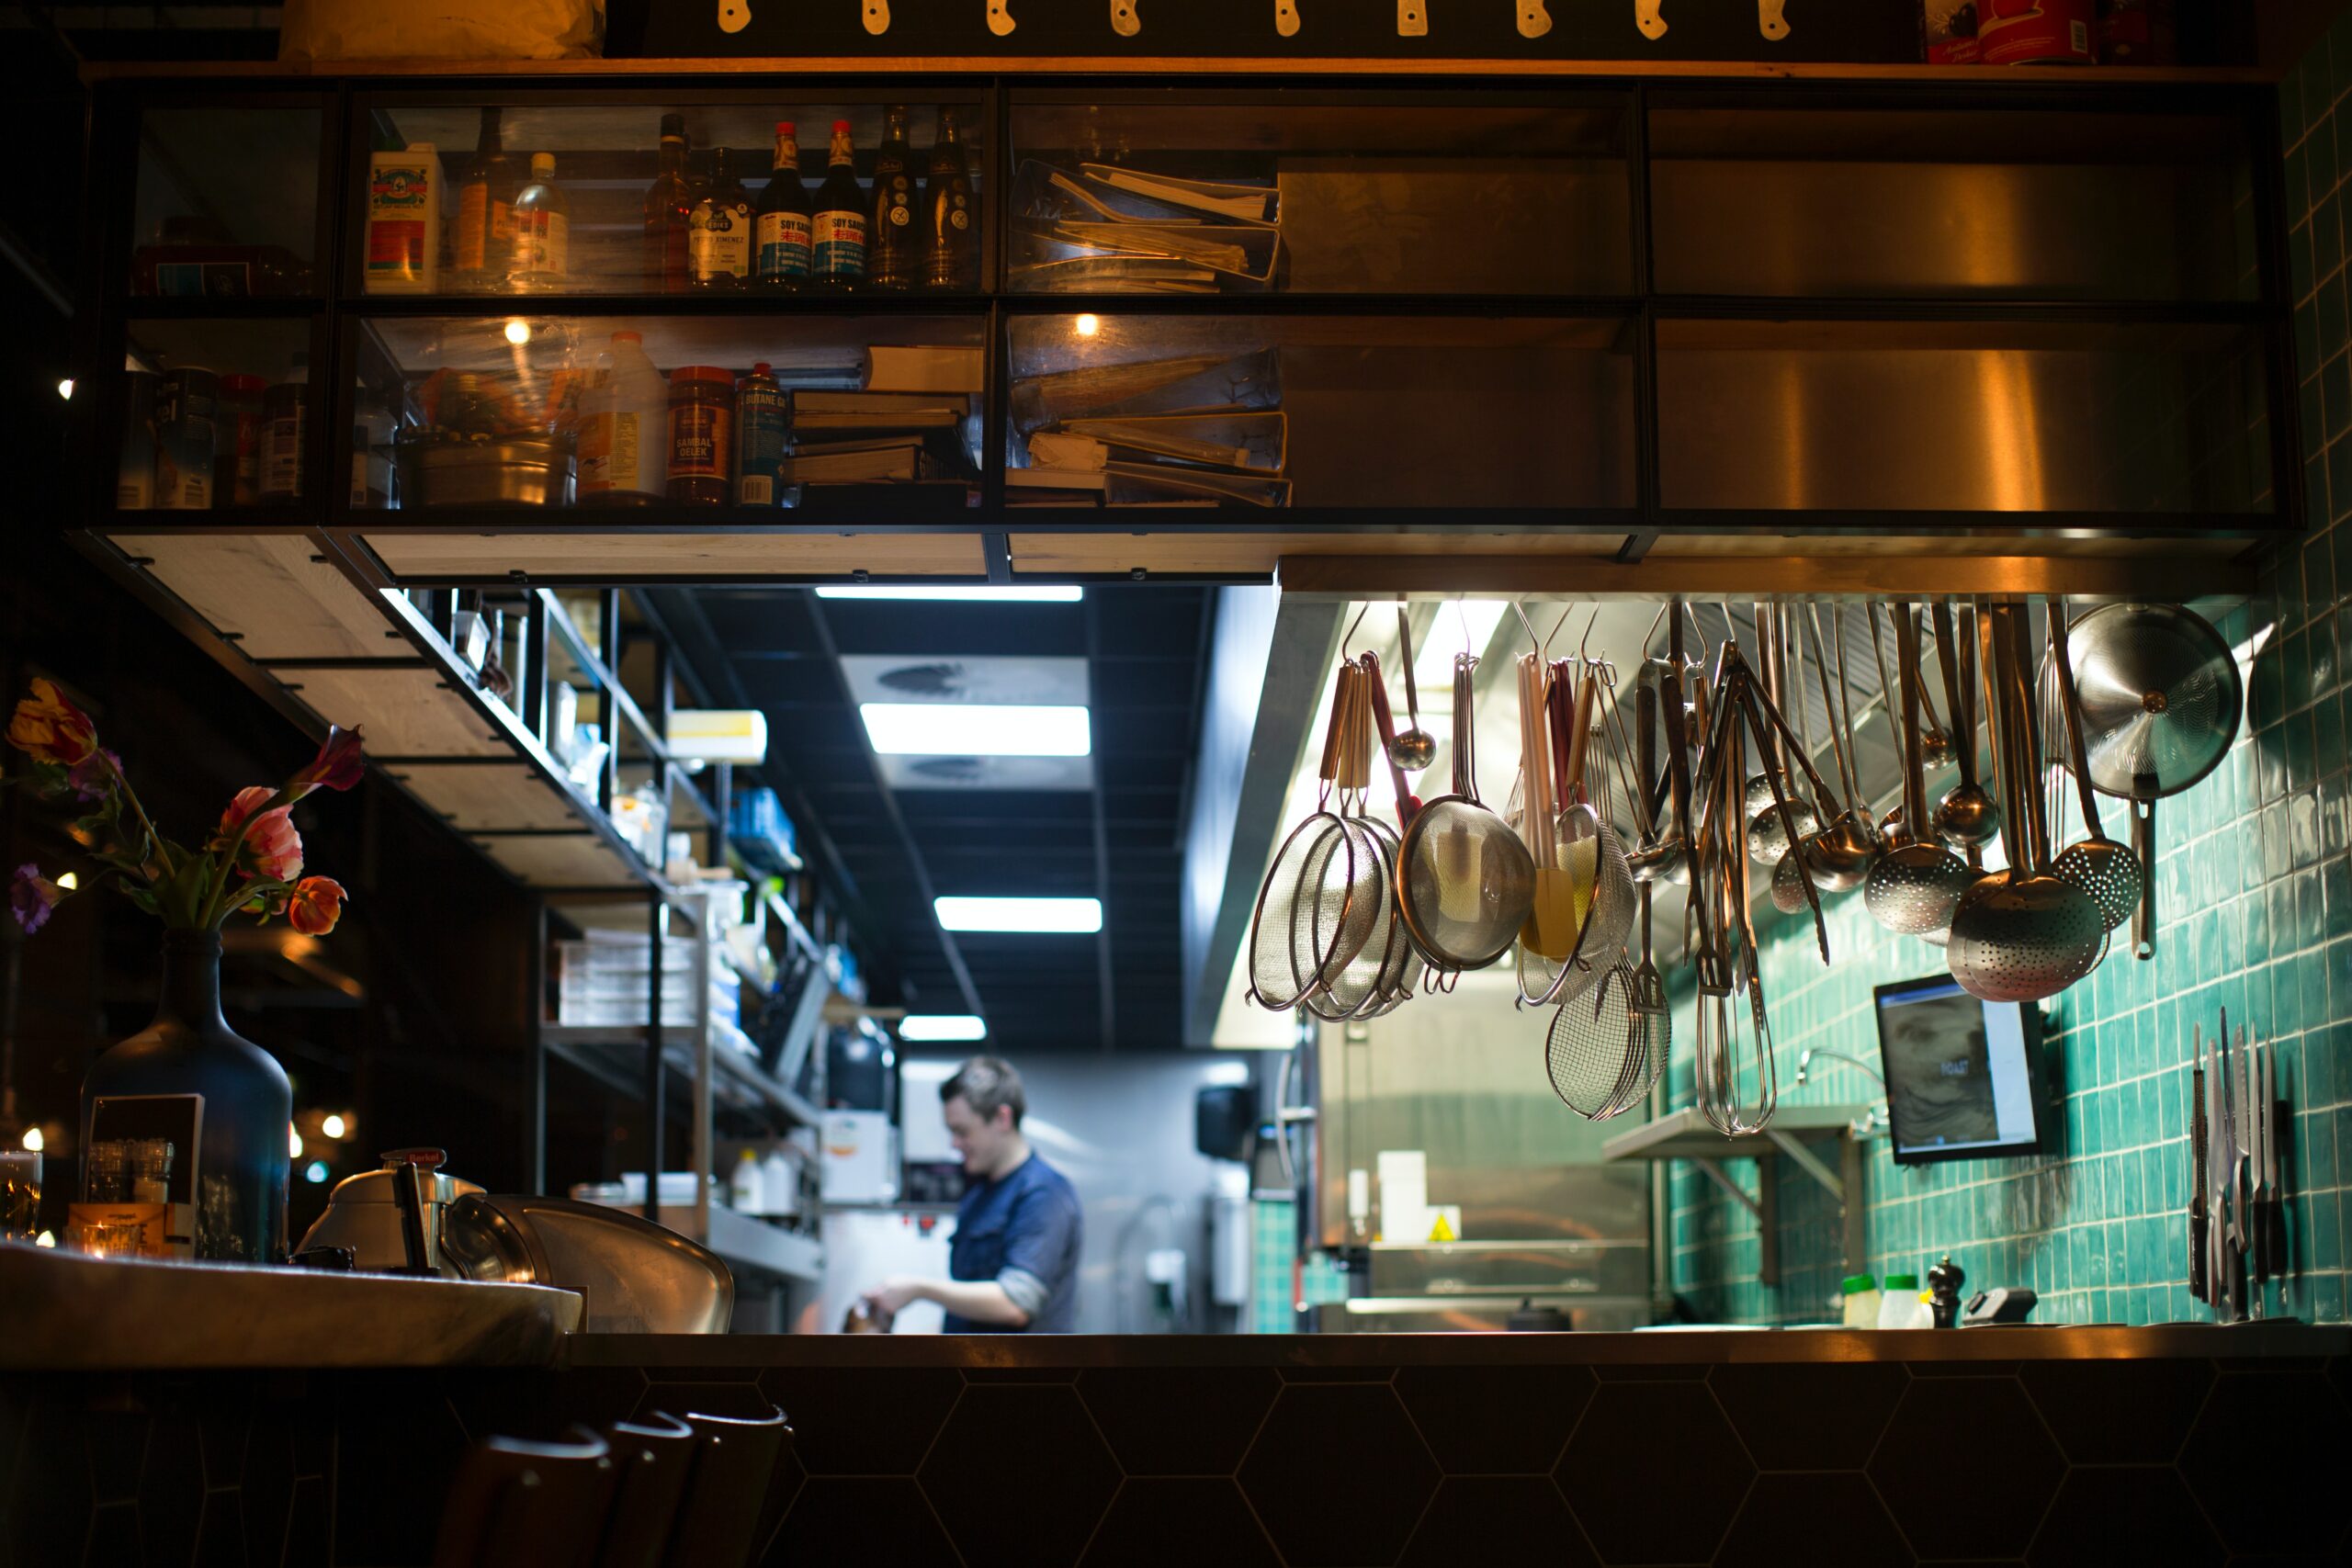 The Role of Kitchen Display Systems in the Restaurant Business